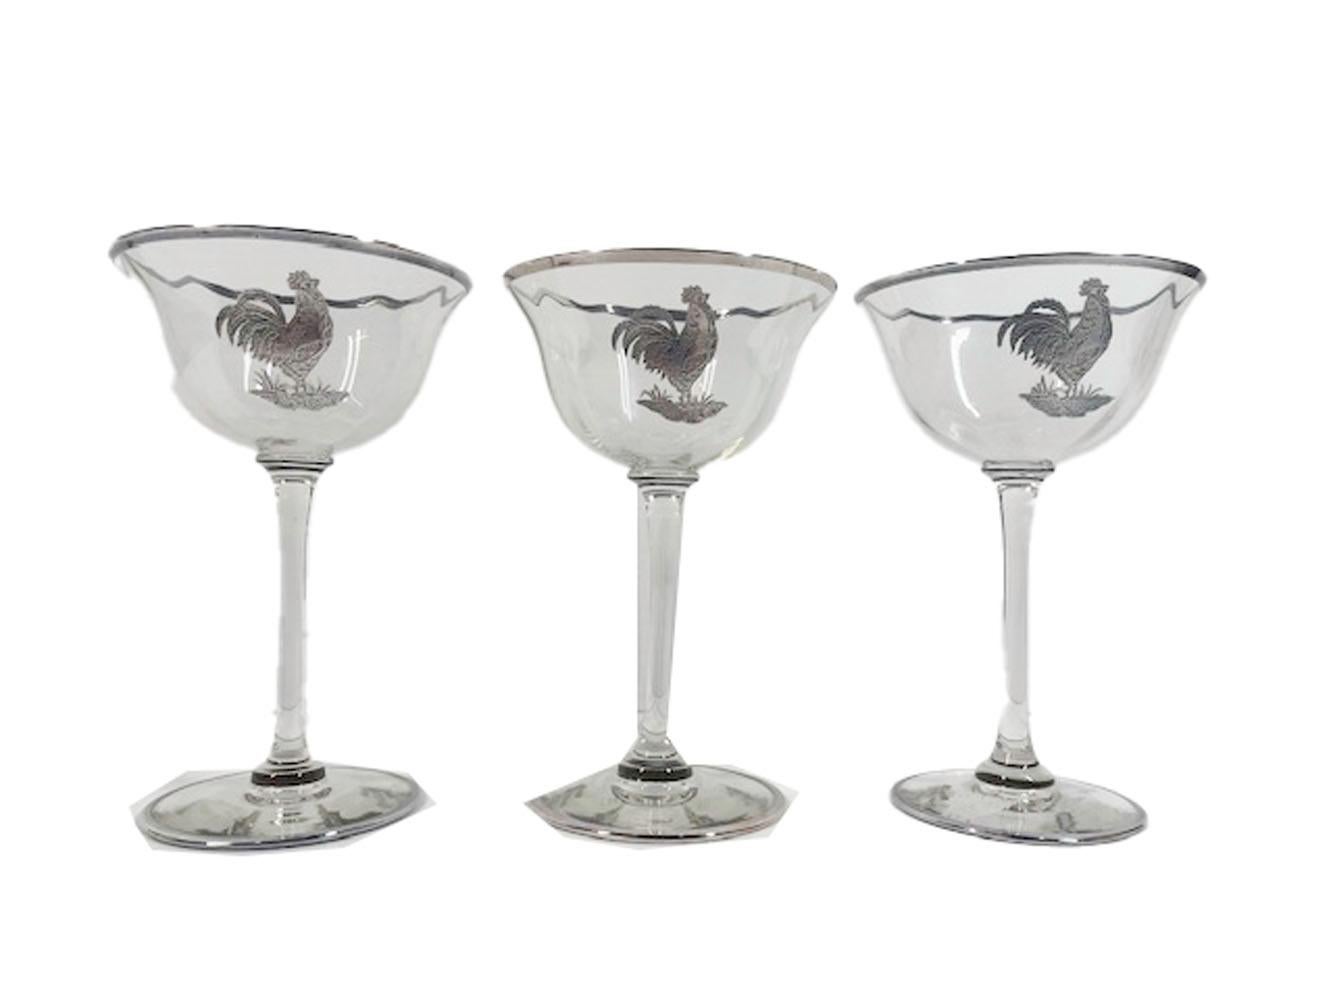 Eight Art Deco martini glasses having optical ribbed bowls raised on tall stems, decorated with a silver overlay rooster and a silver band at the bowl and foot rims.